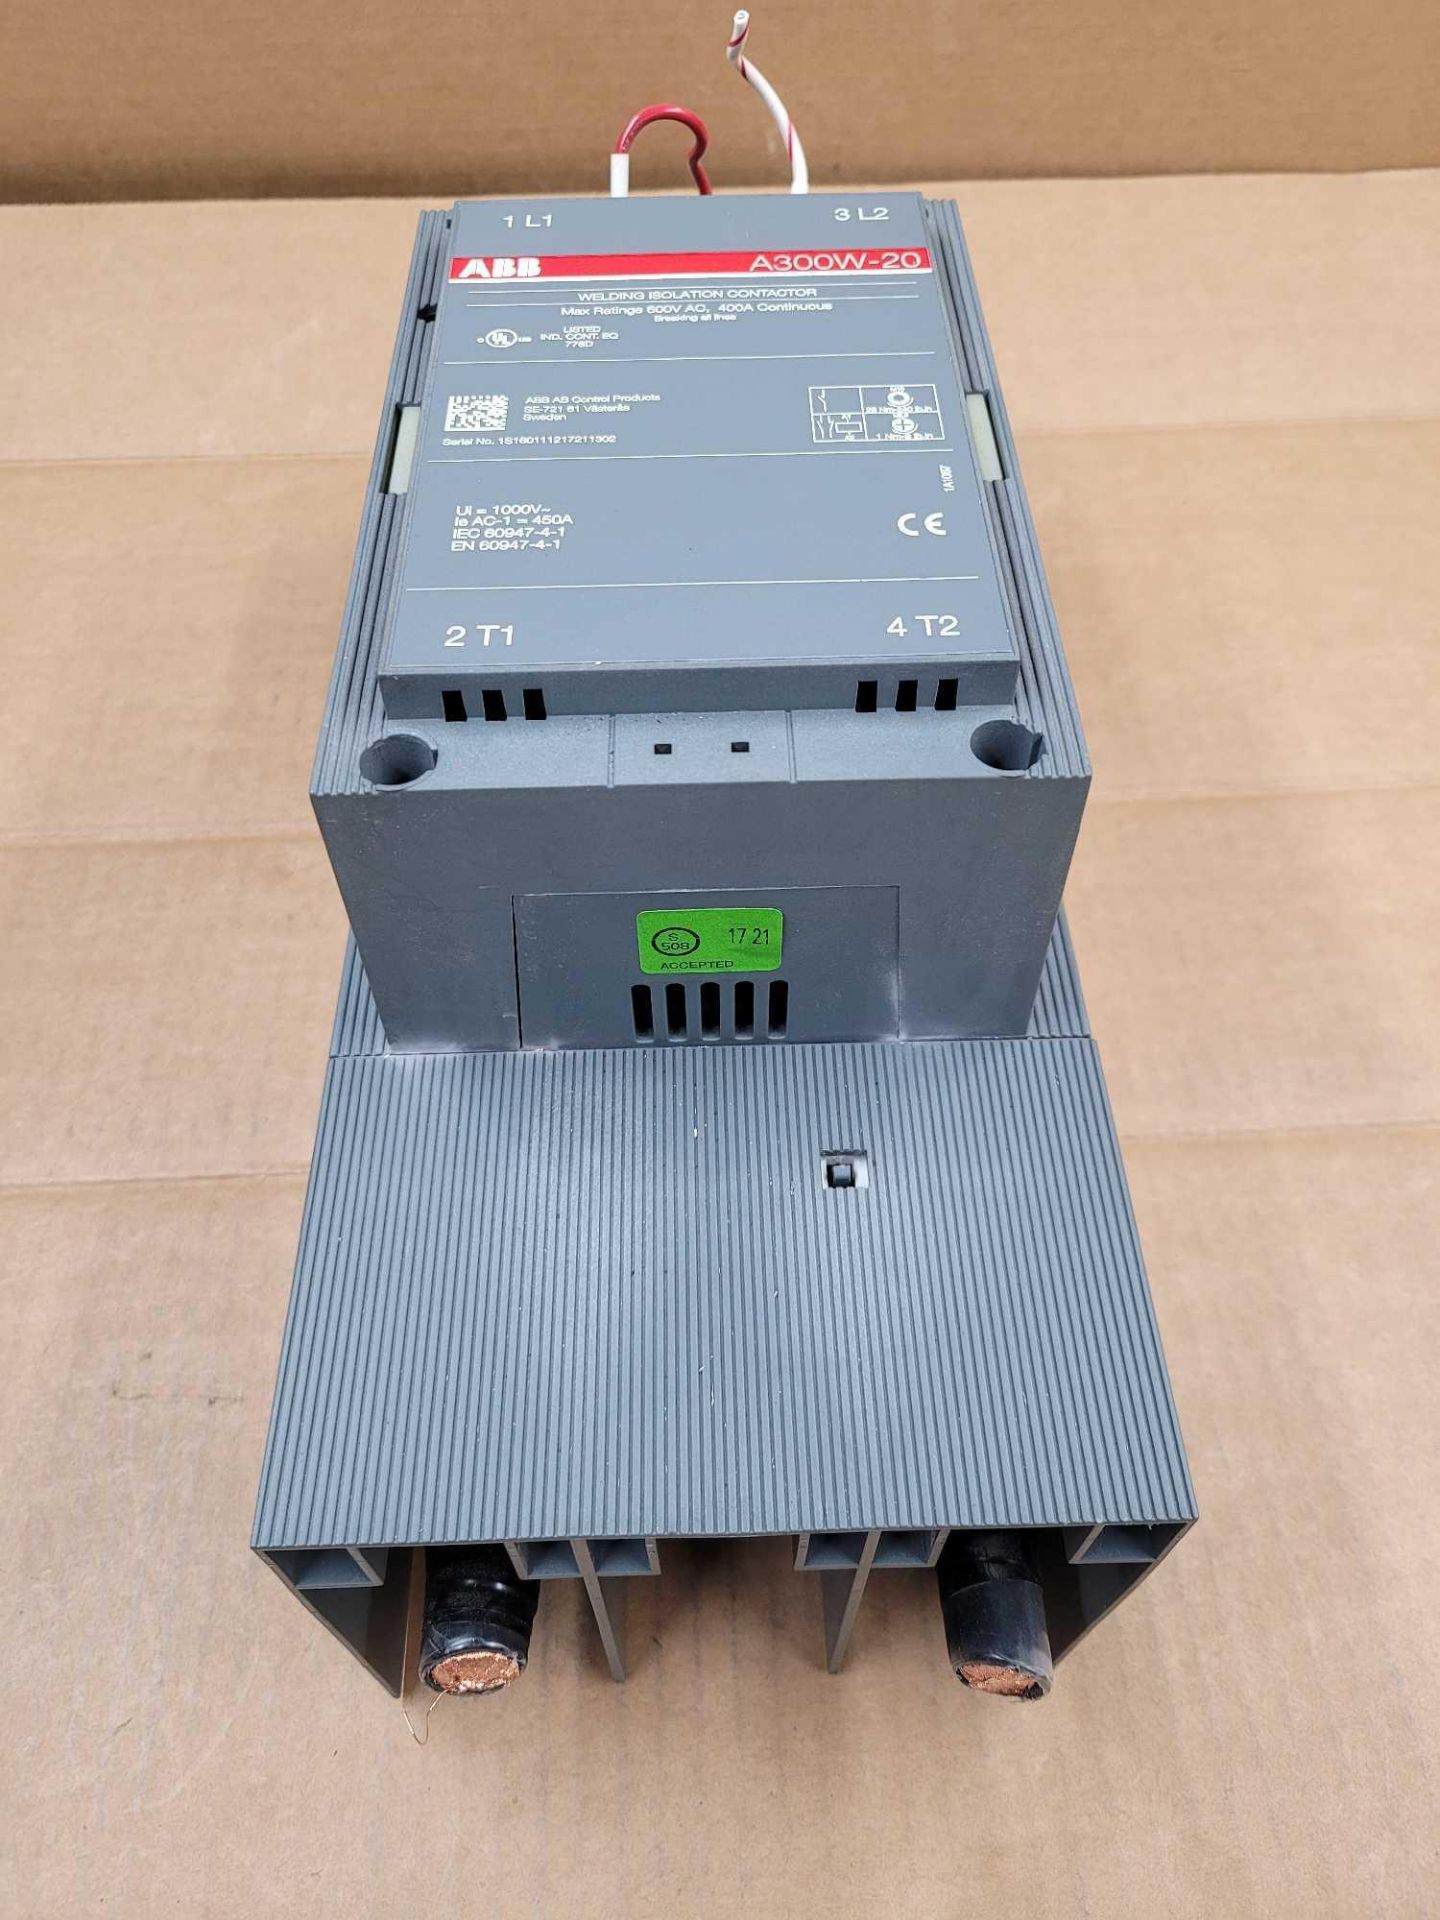 ABB A300W-20 / Welding Isolation Contactor  /  Lot Weight: 13.8 lbs